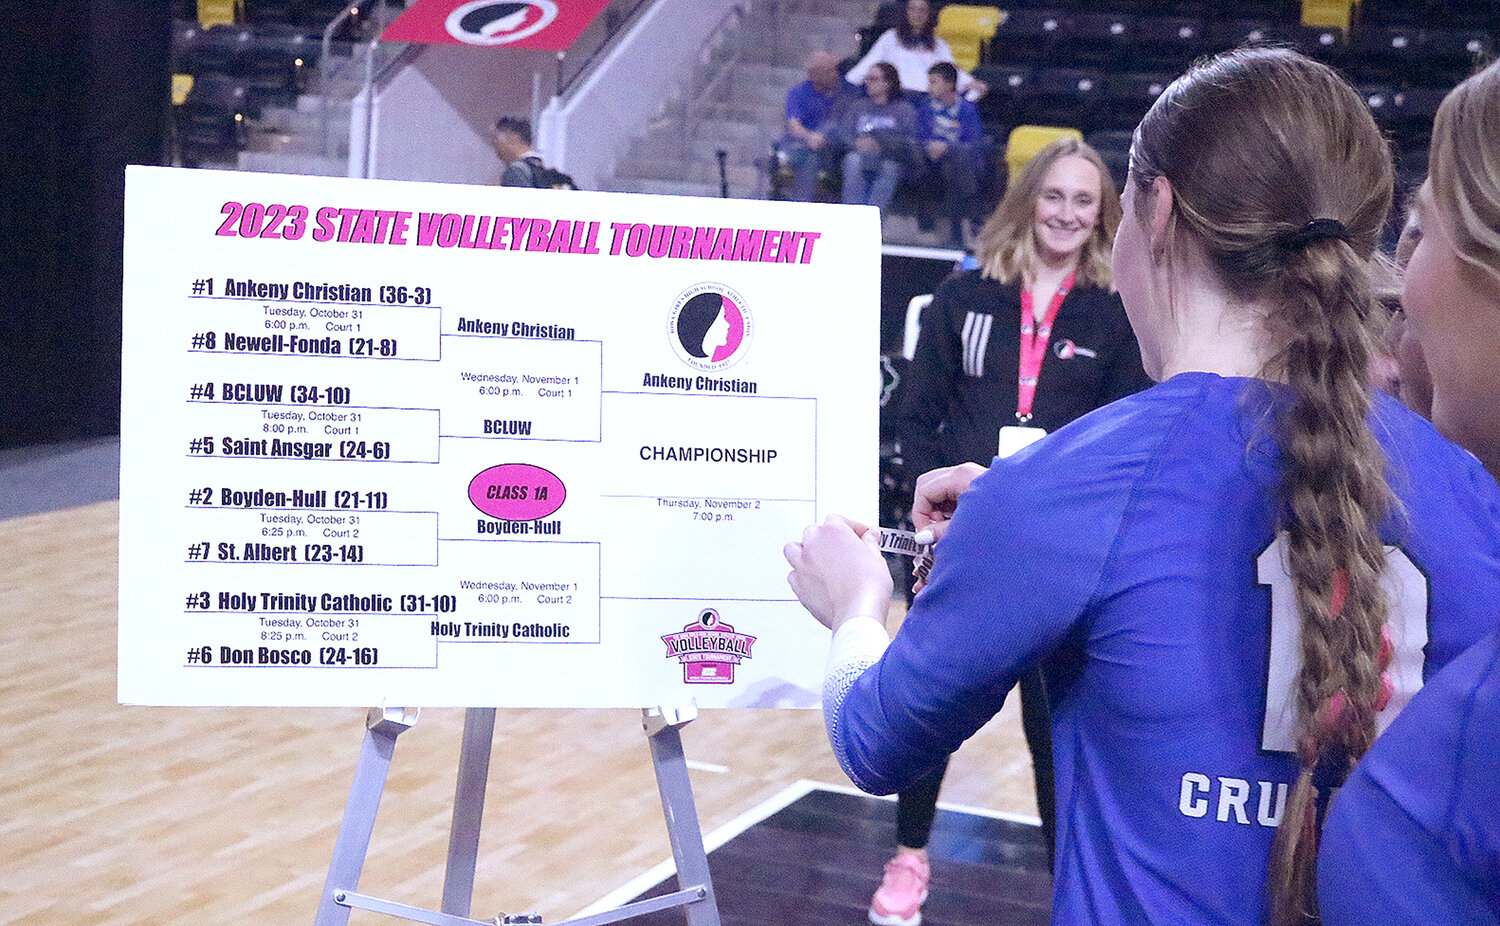 Senior Mary Kate Bendlage adds the HTC sticker to the Class 2A  title bracket after the Crusaders recorded their second sweep of the IGHSAU State Volleyball tournament Wednesday over No. 2 Boyden-Hull. HTC will face No. 1 Ankeny Christian Thursday at 7 p.m. Thursday.